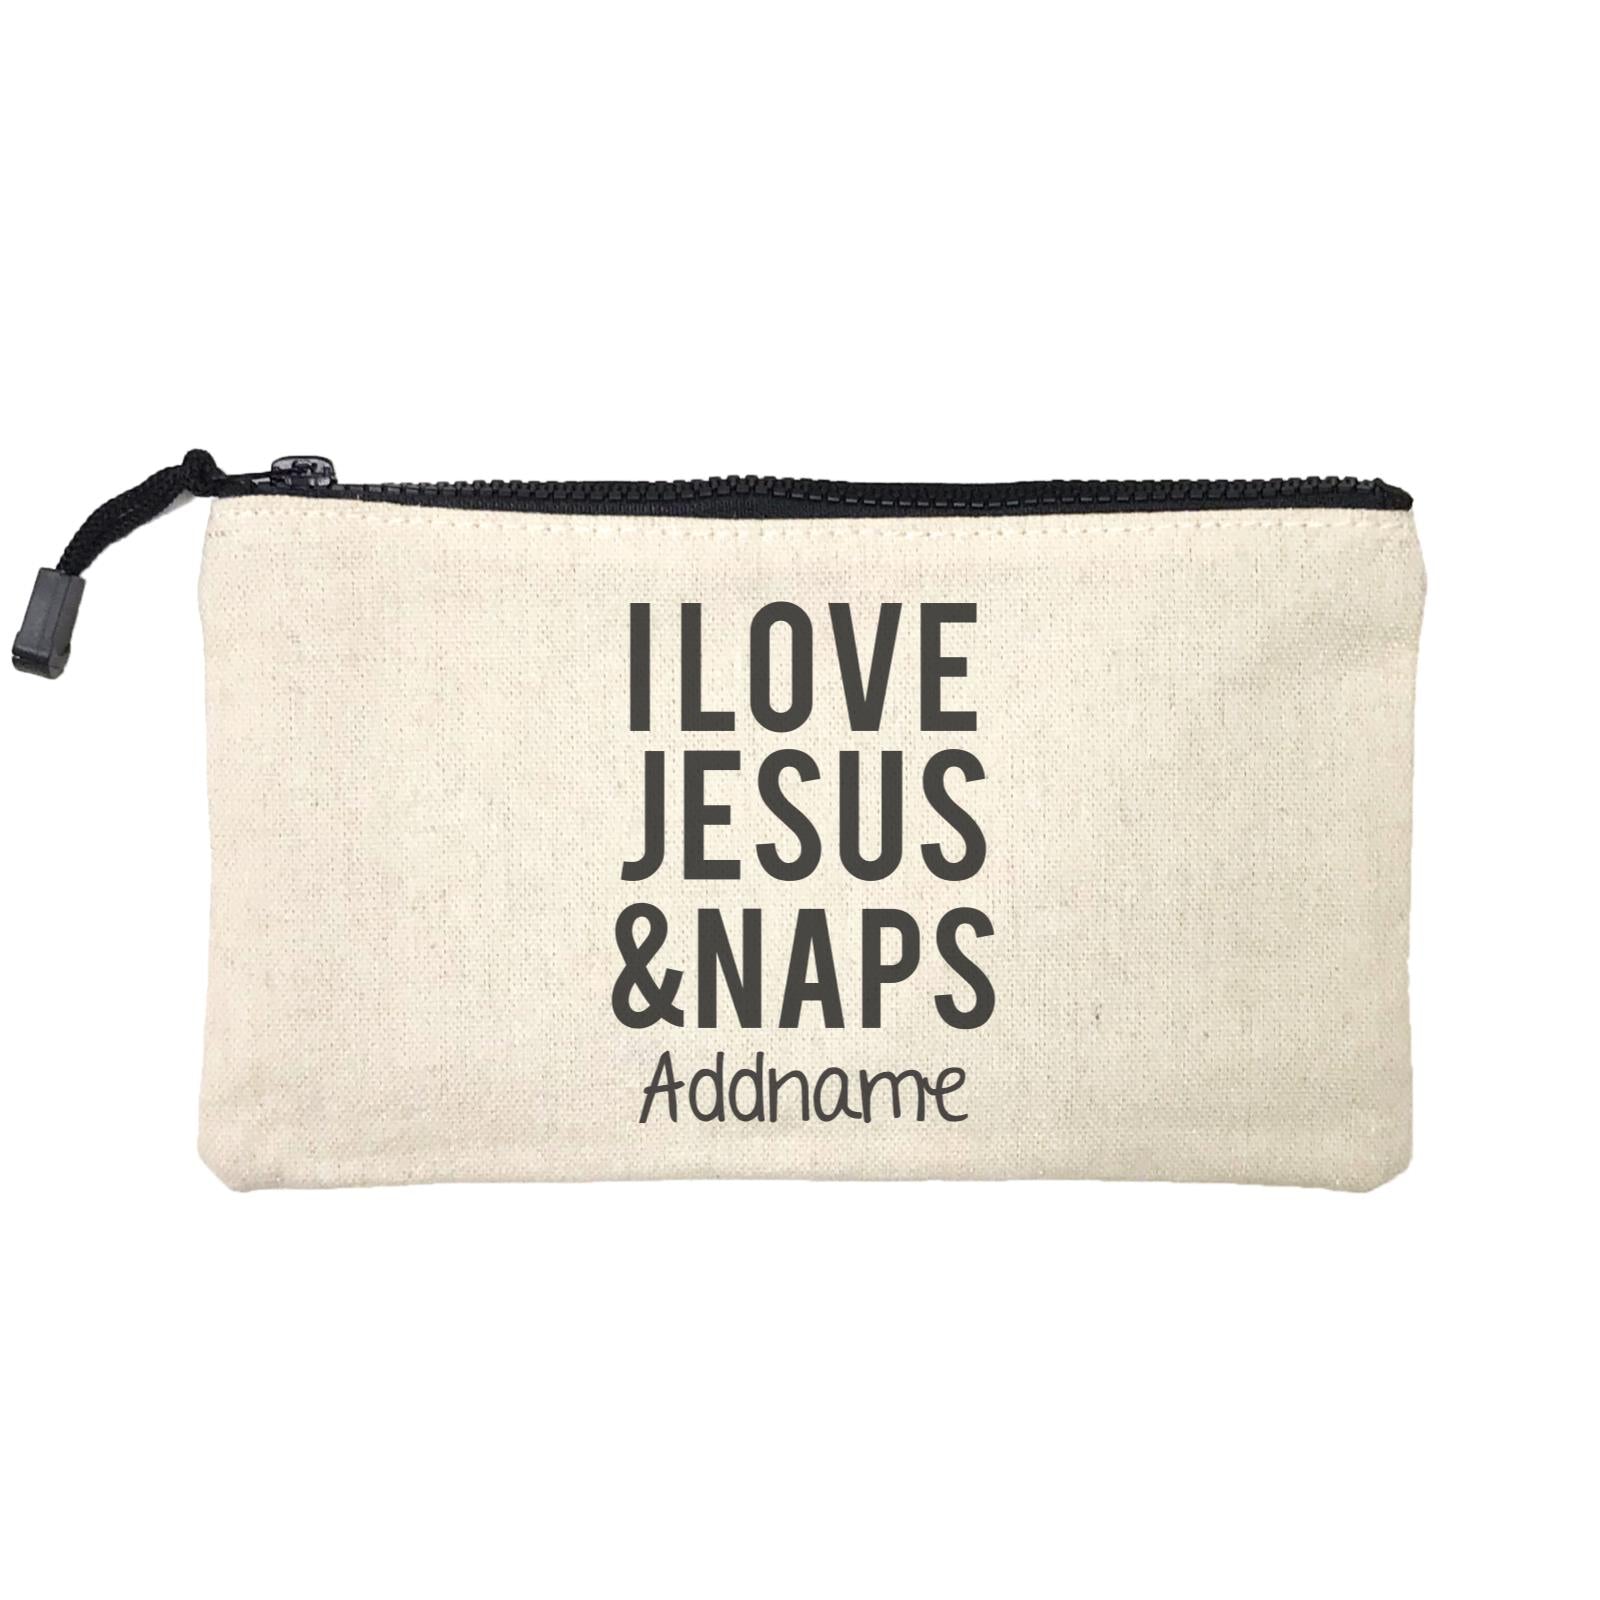 Christian Baby I Love Jesus & Naps Addname Mini Accessories Stationery Pouch